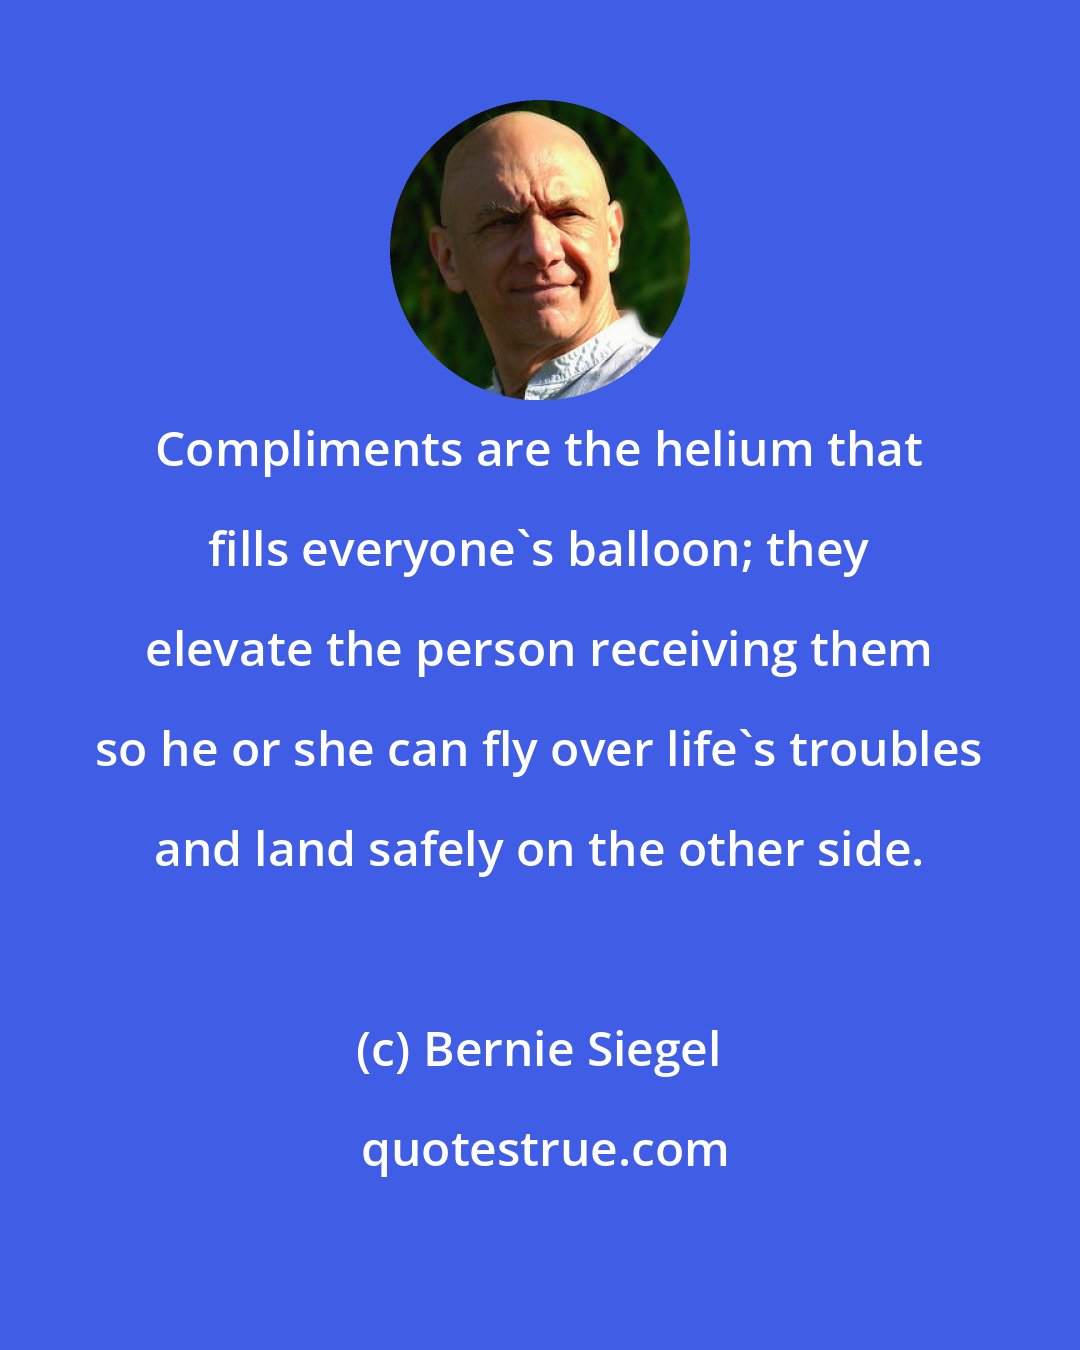 Bernie Siegel: Compliments are the helium that fills everyone's balloon; they elevate the person receiving them so he or she can fly over life's troubles and land safely on the other side.